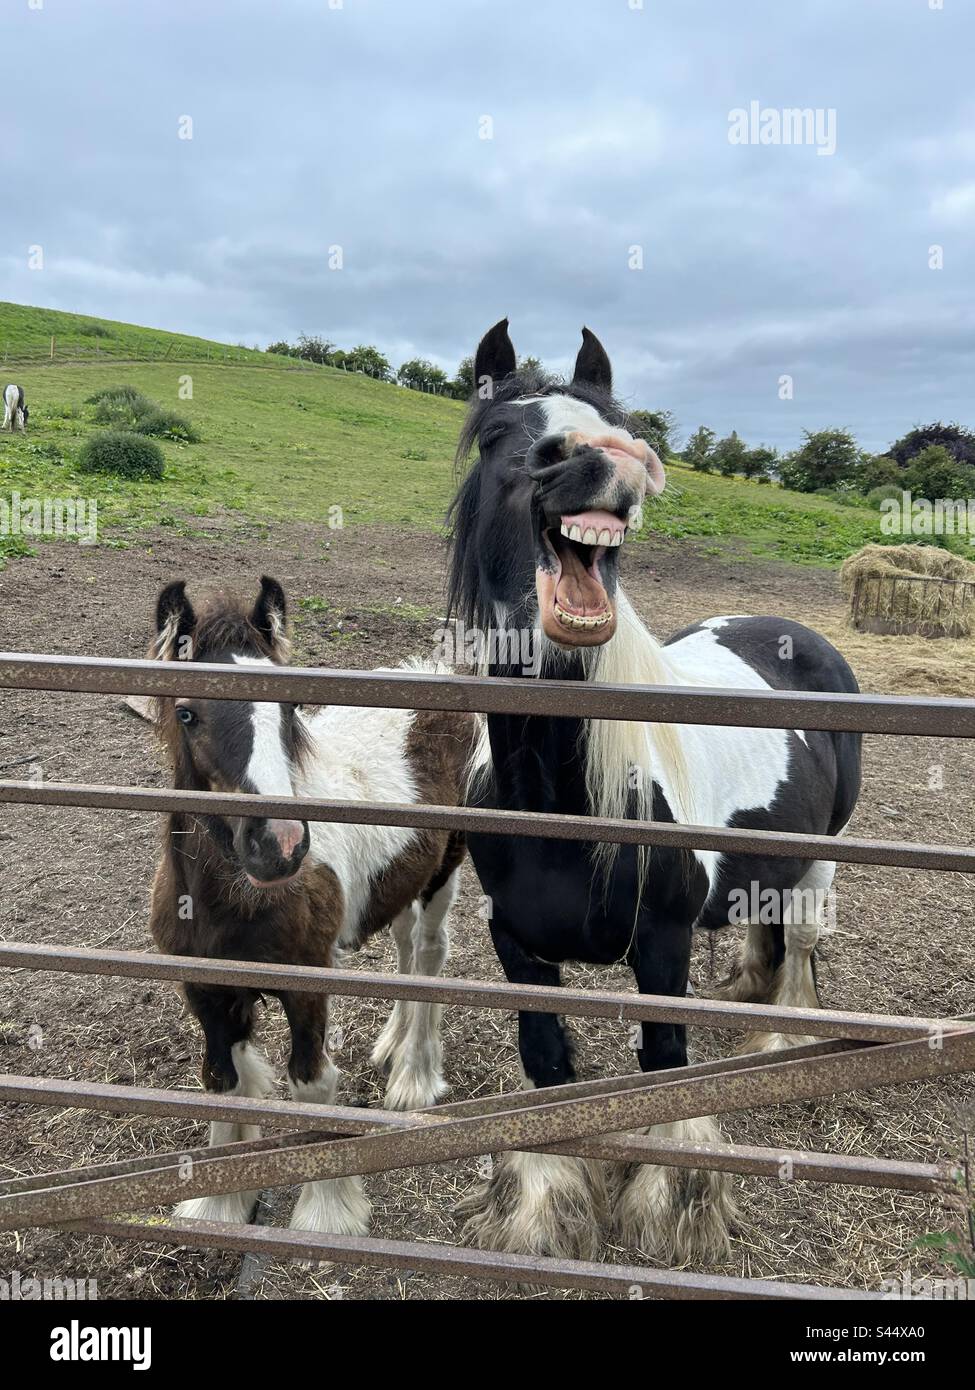 Hilarious and funny picture of a horse laughing with his mouth open and teeth showing. His foal is with him Stock Photo